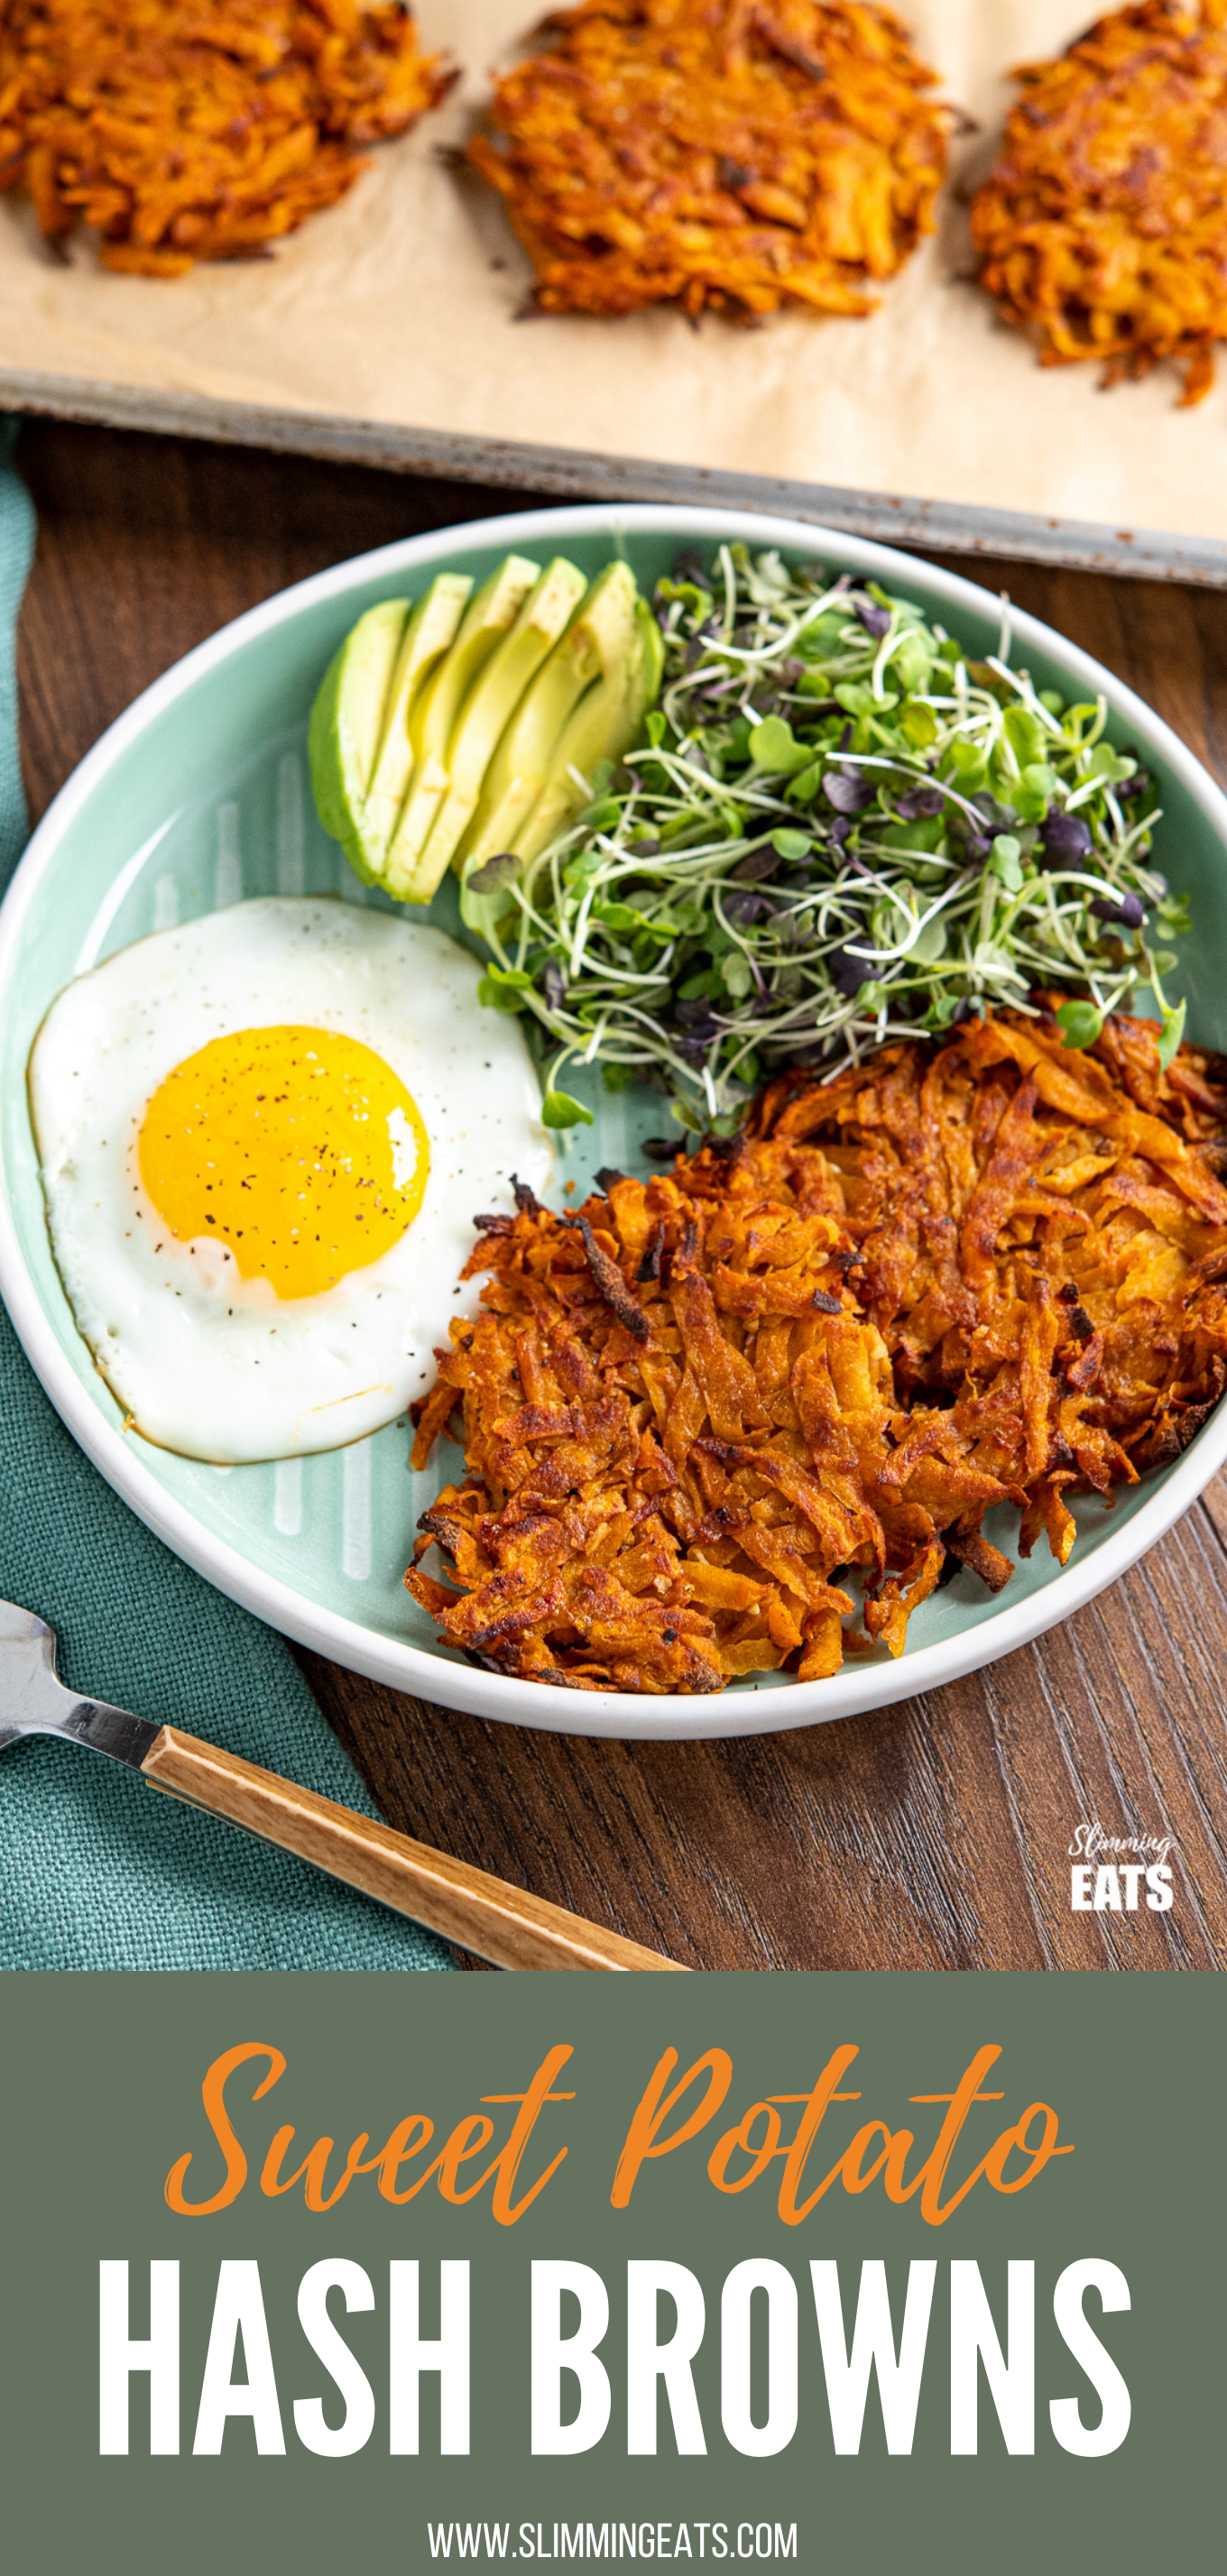 sweet potato hash browns with egg, avocado and micro greens on a teal plate.